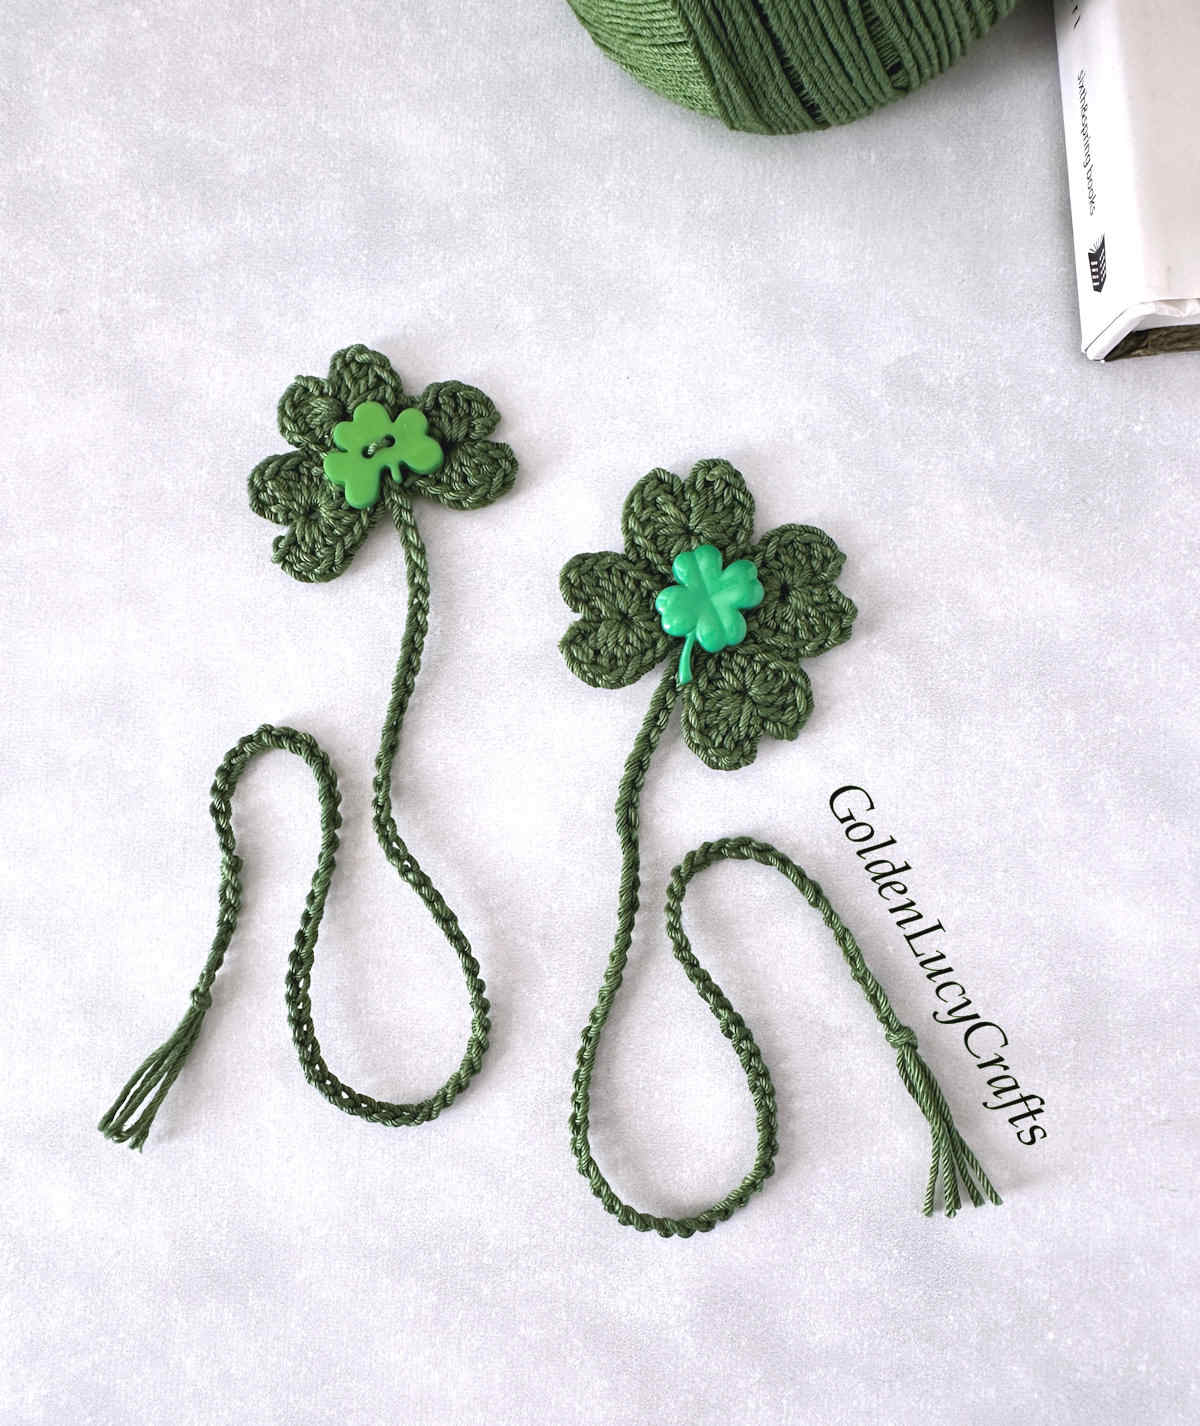 Two crocheted bookmarks - shamrock and four leaf clover bookmarks.